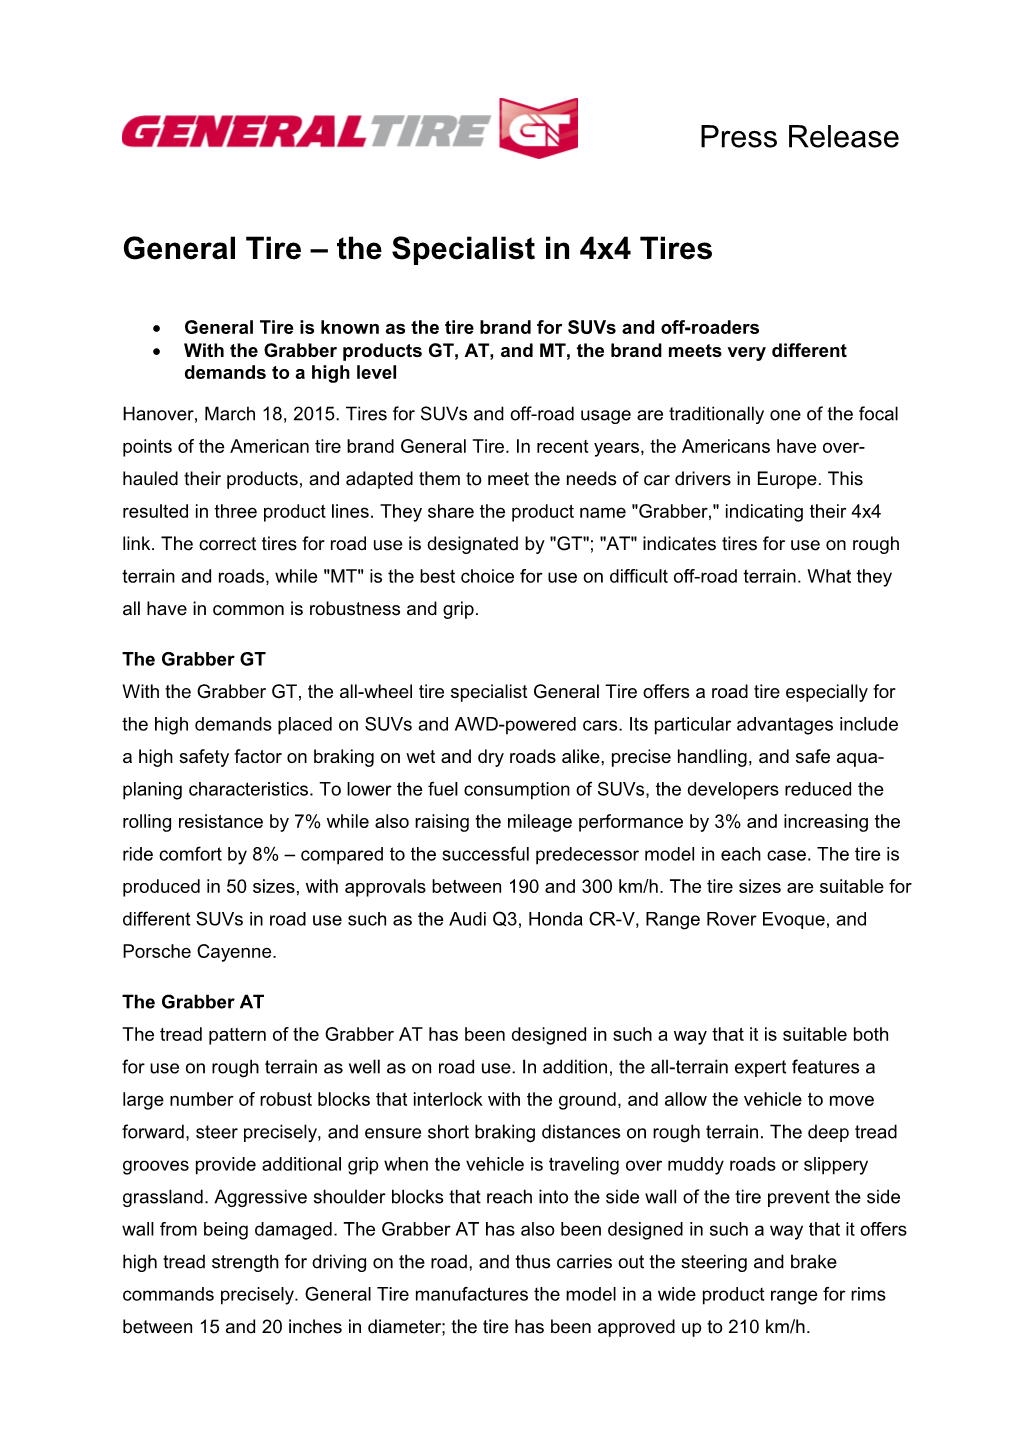 General Tire the Specialist in 4X4 Tires